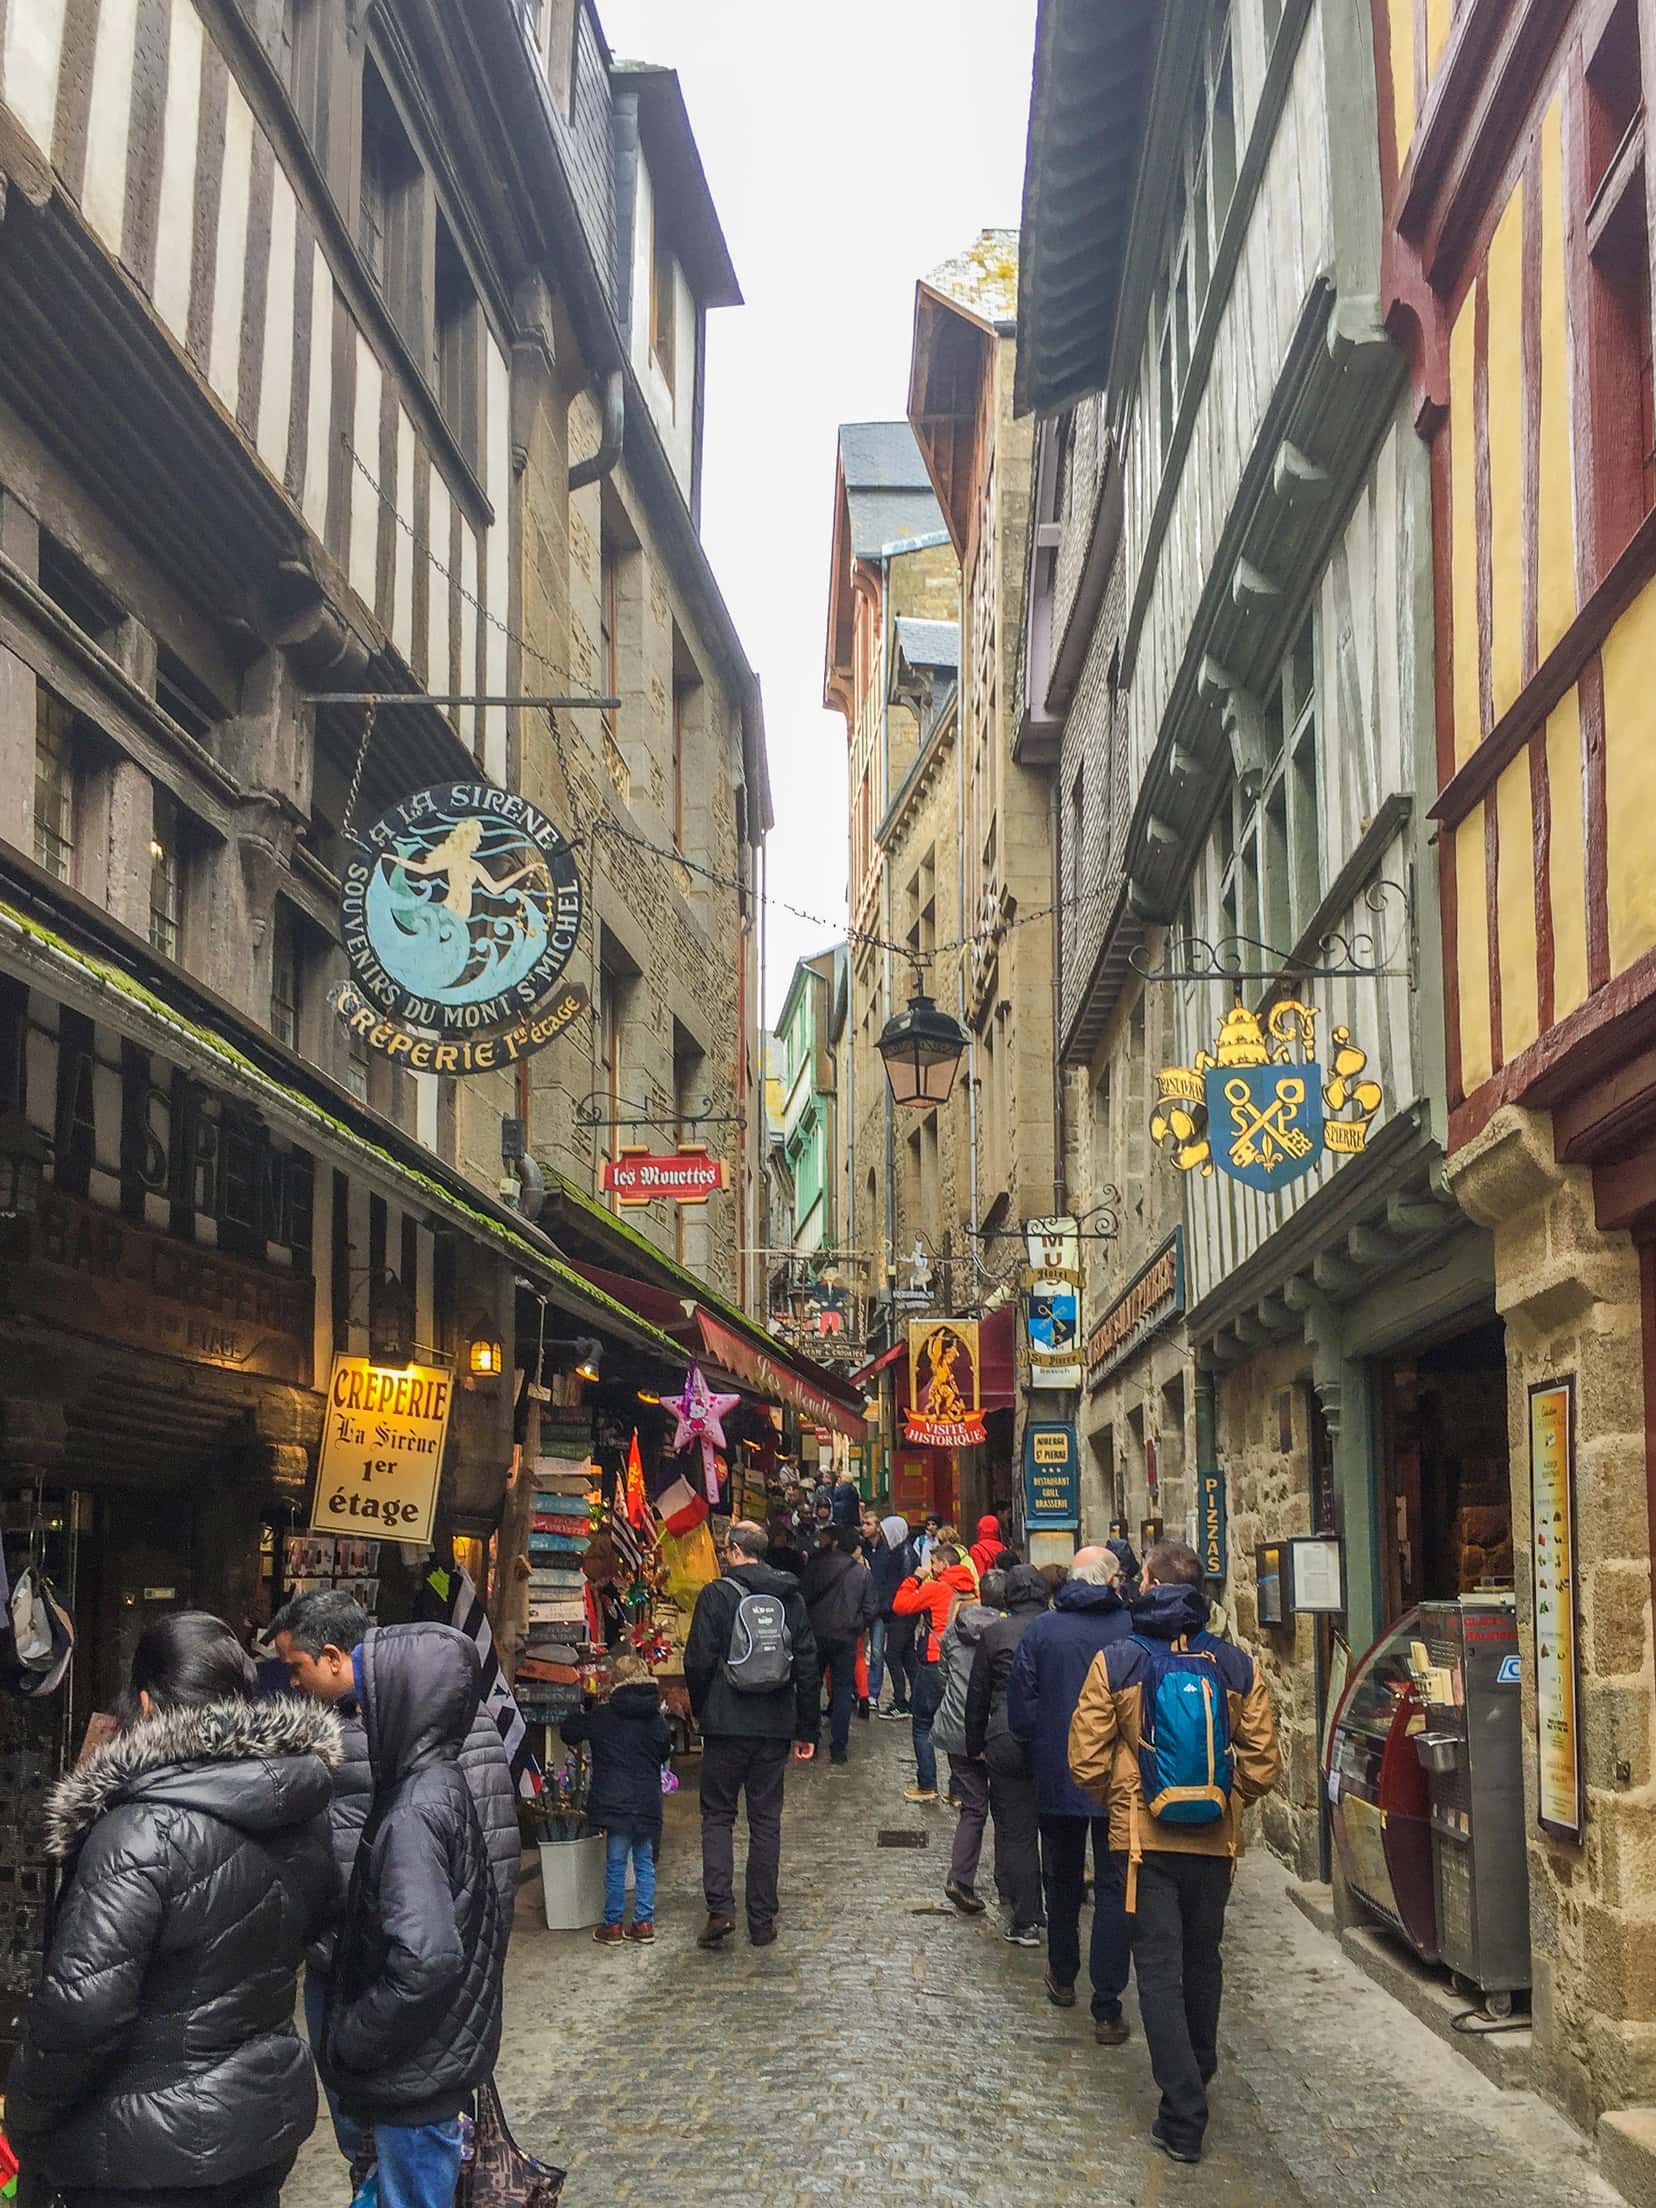 People in a busy narrow street surrounded by tall old buildings